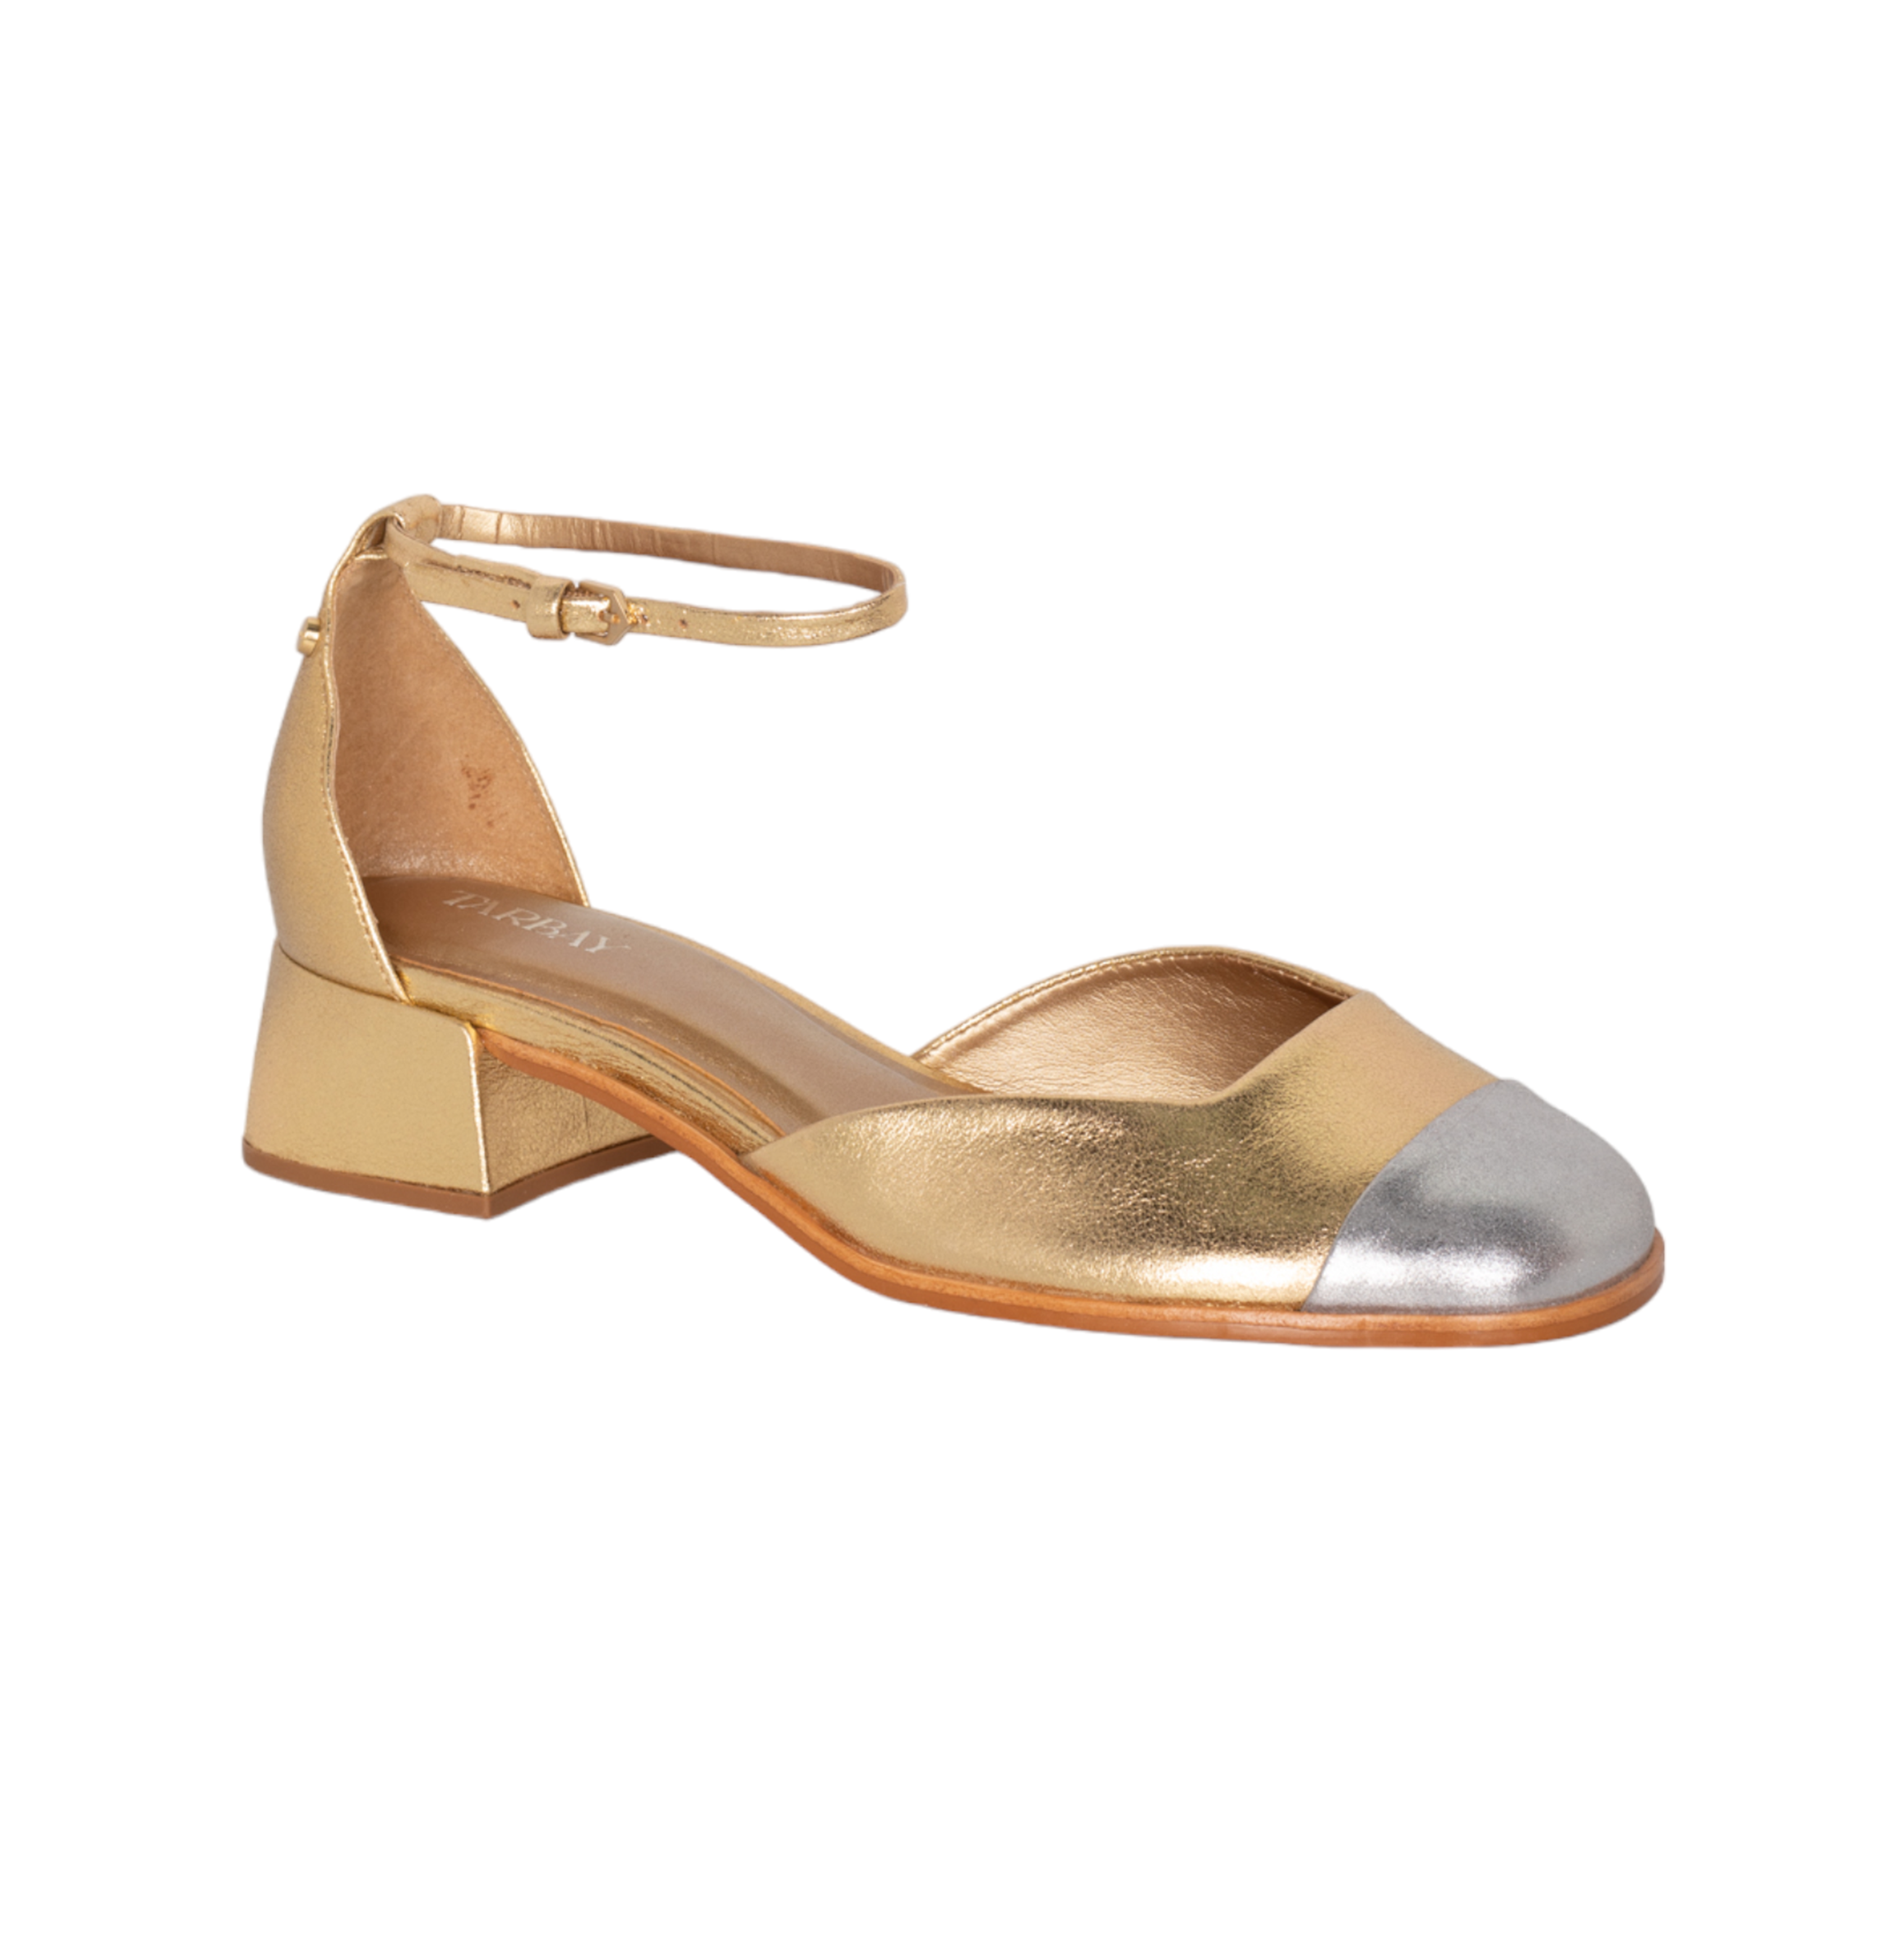 Giovanna Sandals - Gold & Silver Sandals TARBAY   